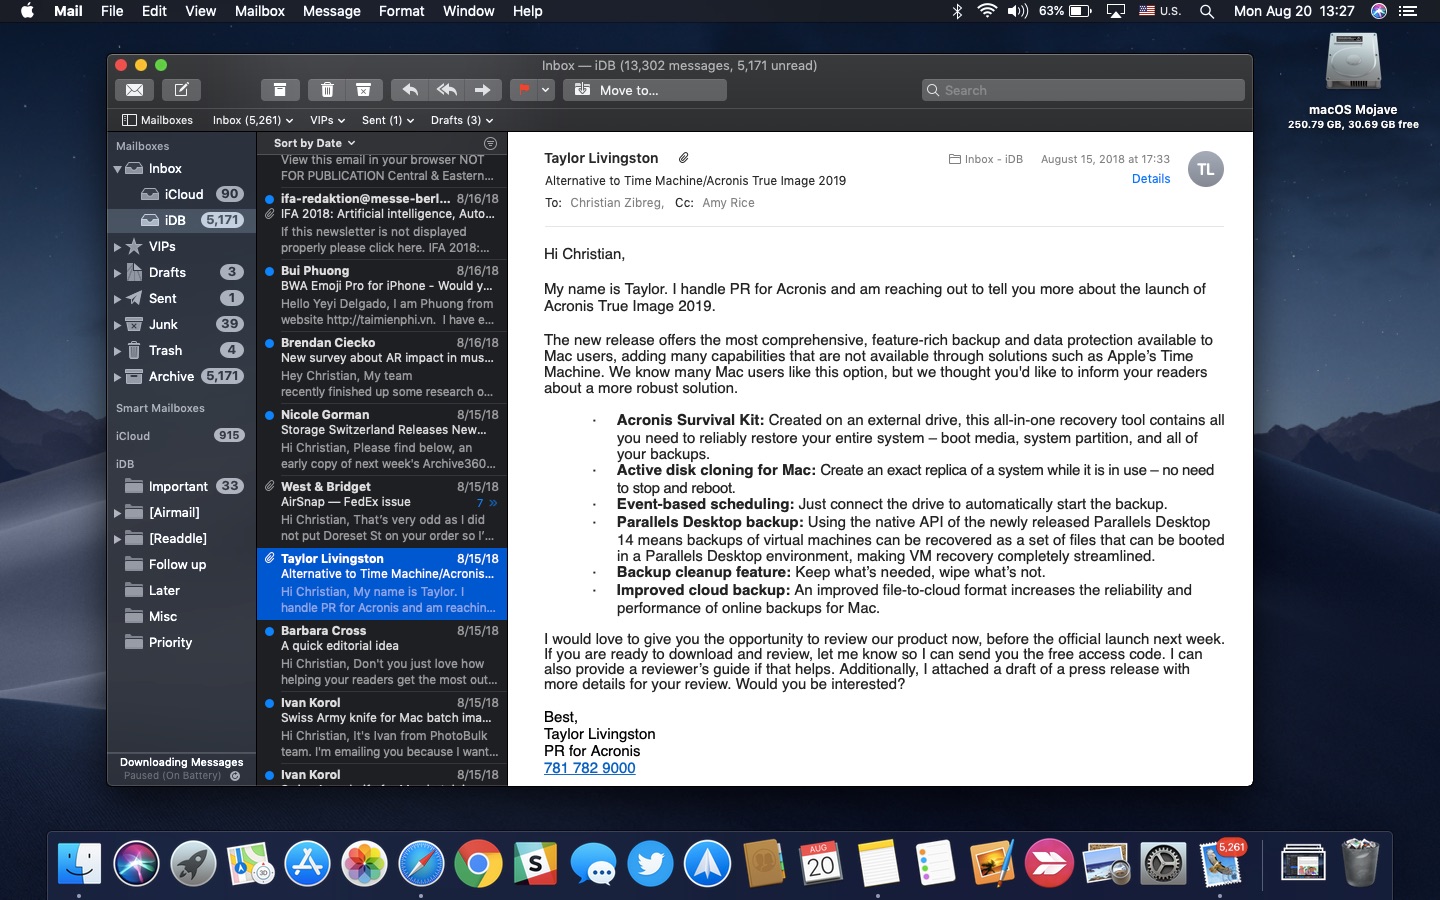 Mac Dark Mode uses a white background for text and web content